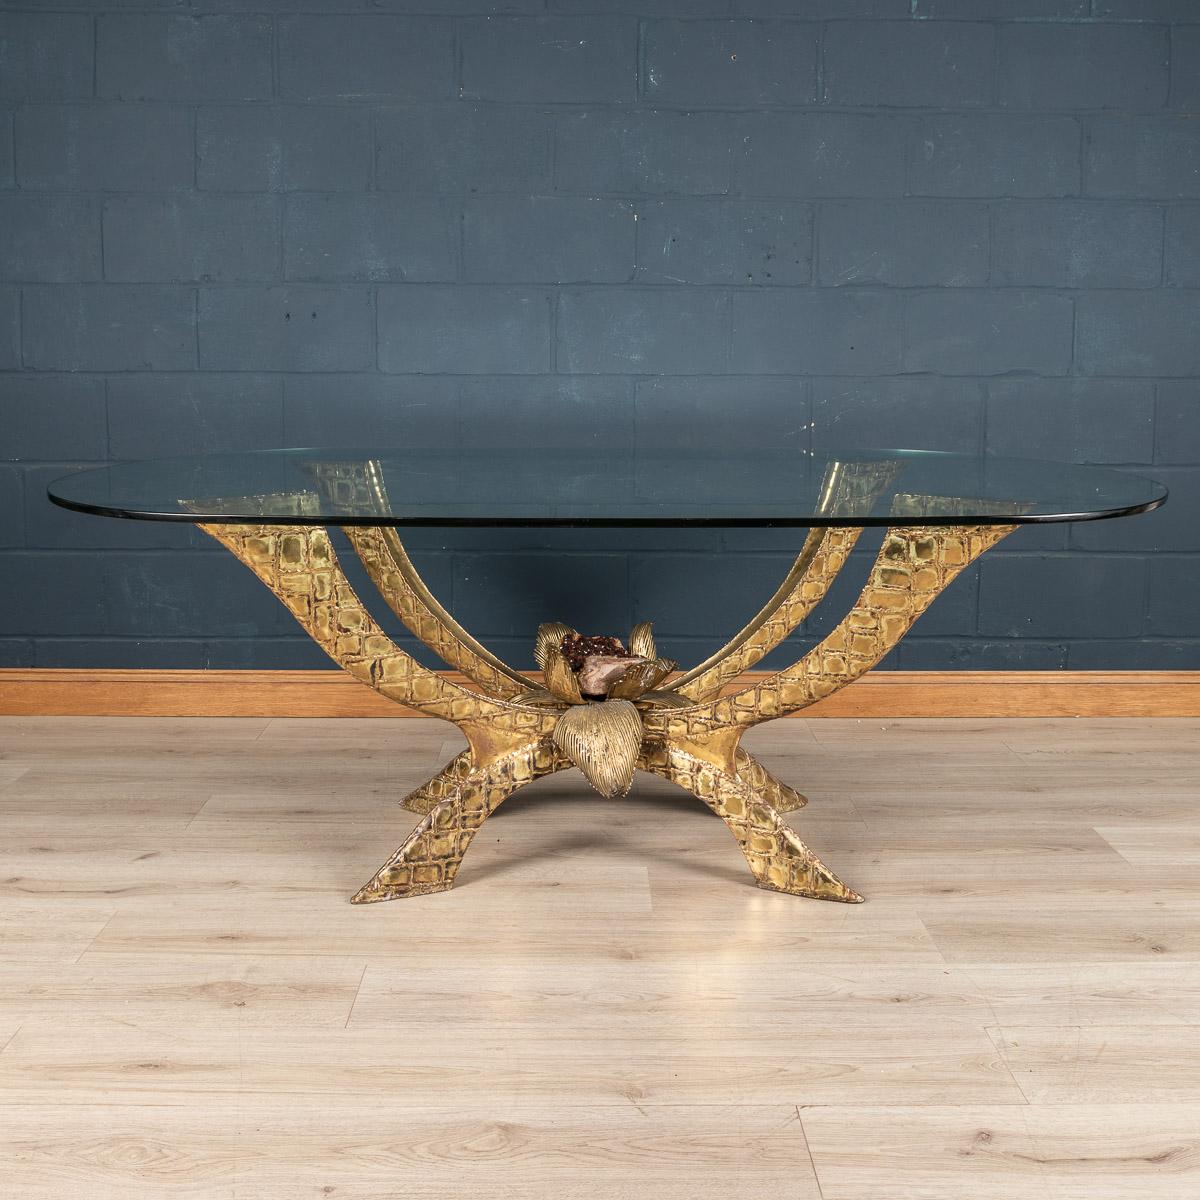 A rare and impressive dining table by Jacques Duval-Brasseur, made in France around the 1970s. The thick oval glass is supported by a sculptural frame entirely made of brass, encompassing a smoked quartz crystal to the centre. Signed to the